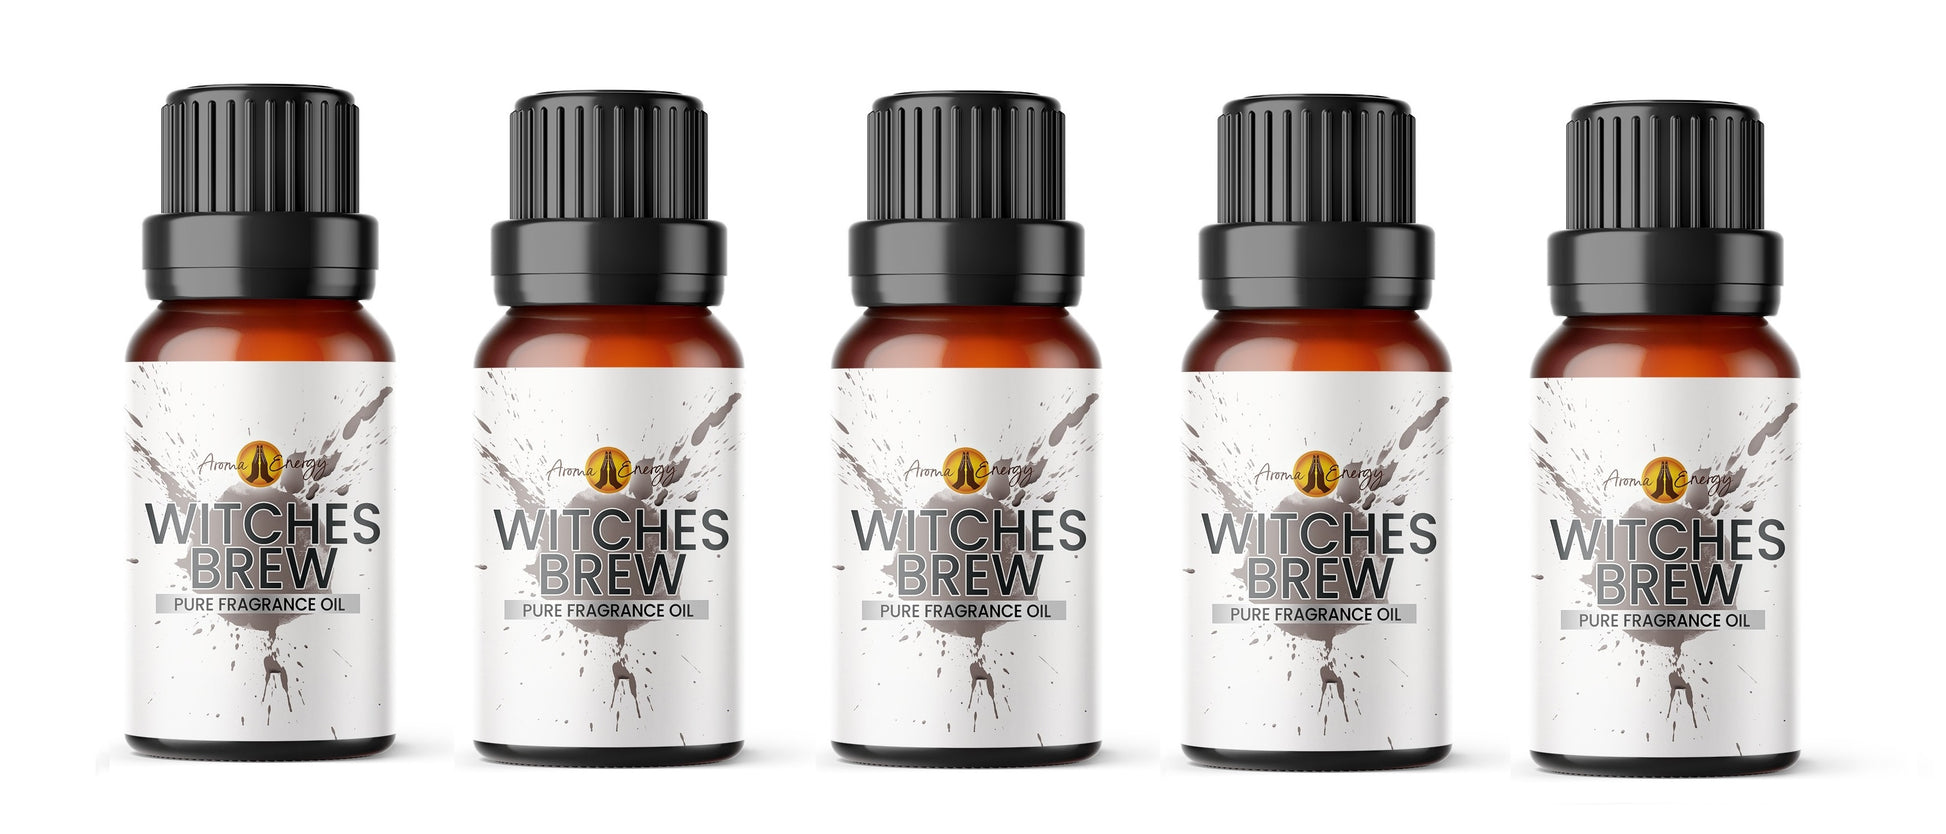 Witches Brew Fragrance Oil - Aroma Energy